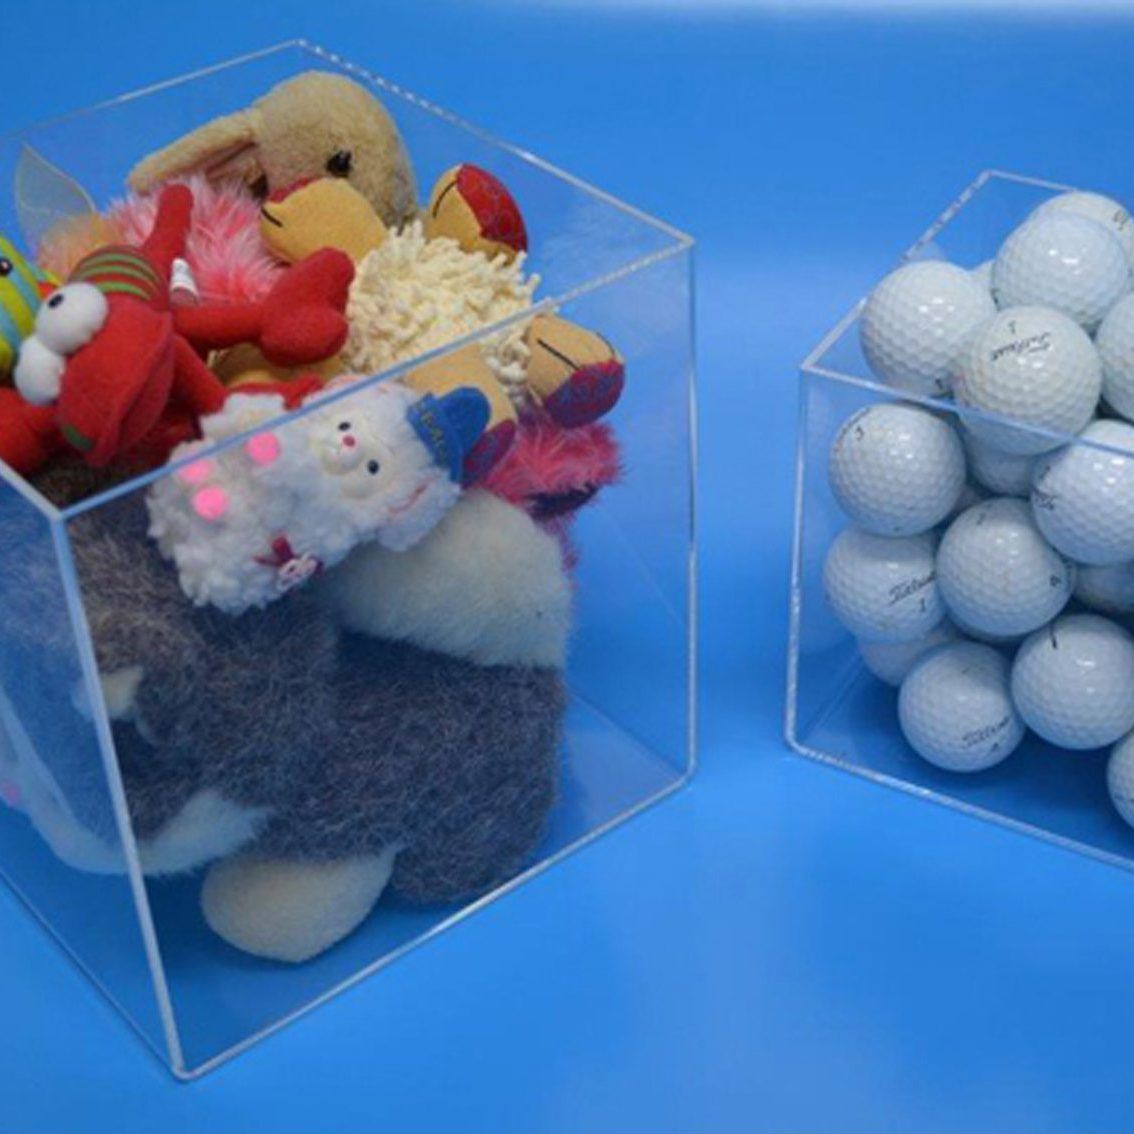 Display cubes used as dumpbins to display items like toys, golf balls, etc